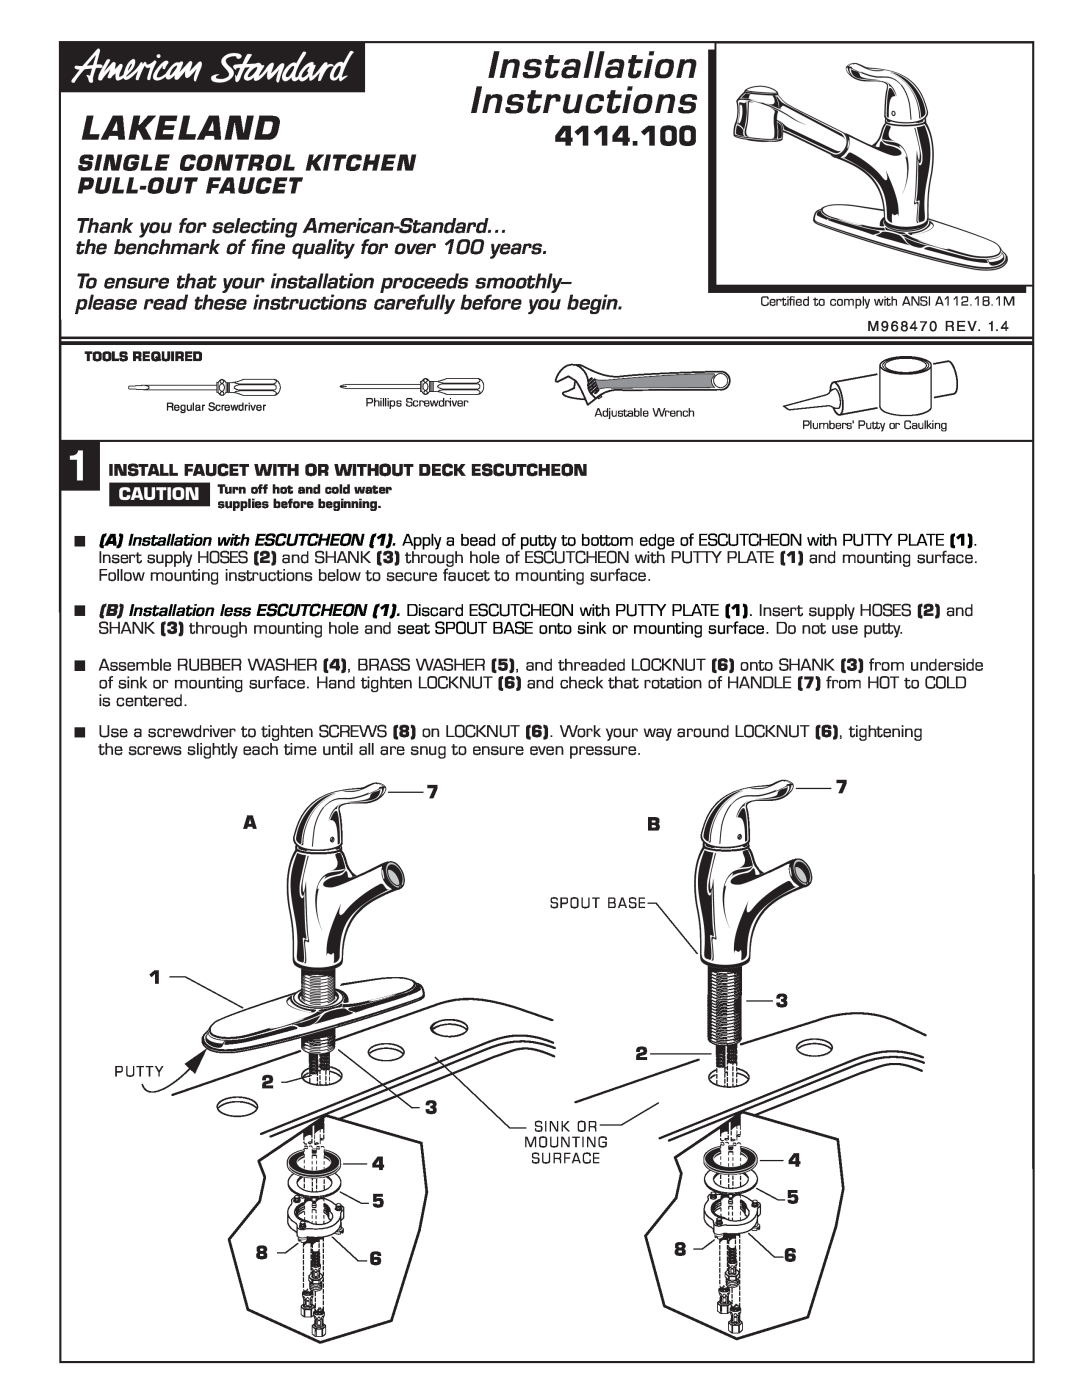 American Standard Installation Instructions, LAKELAND4114.100, Single Control Kitchen Pull-Out Faucet 